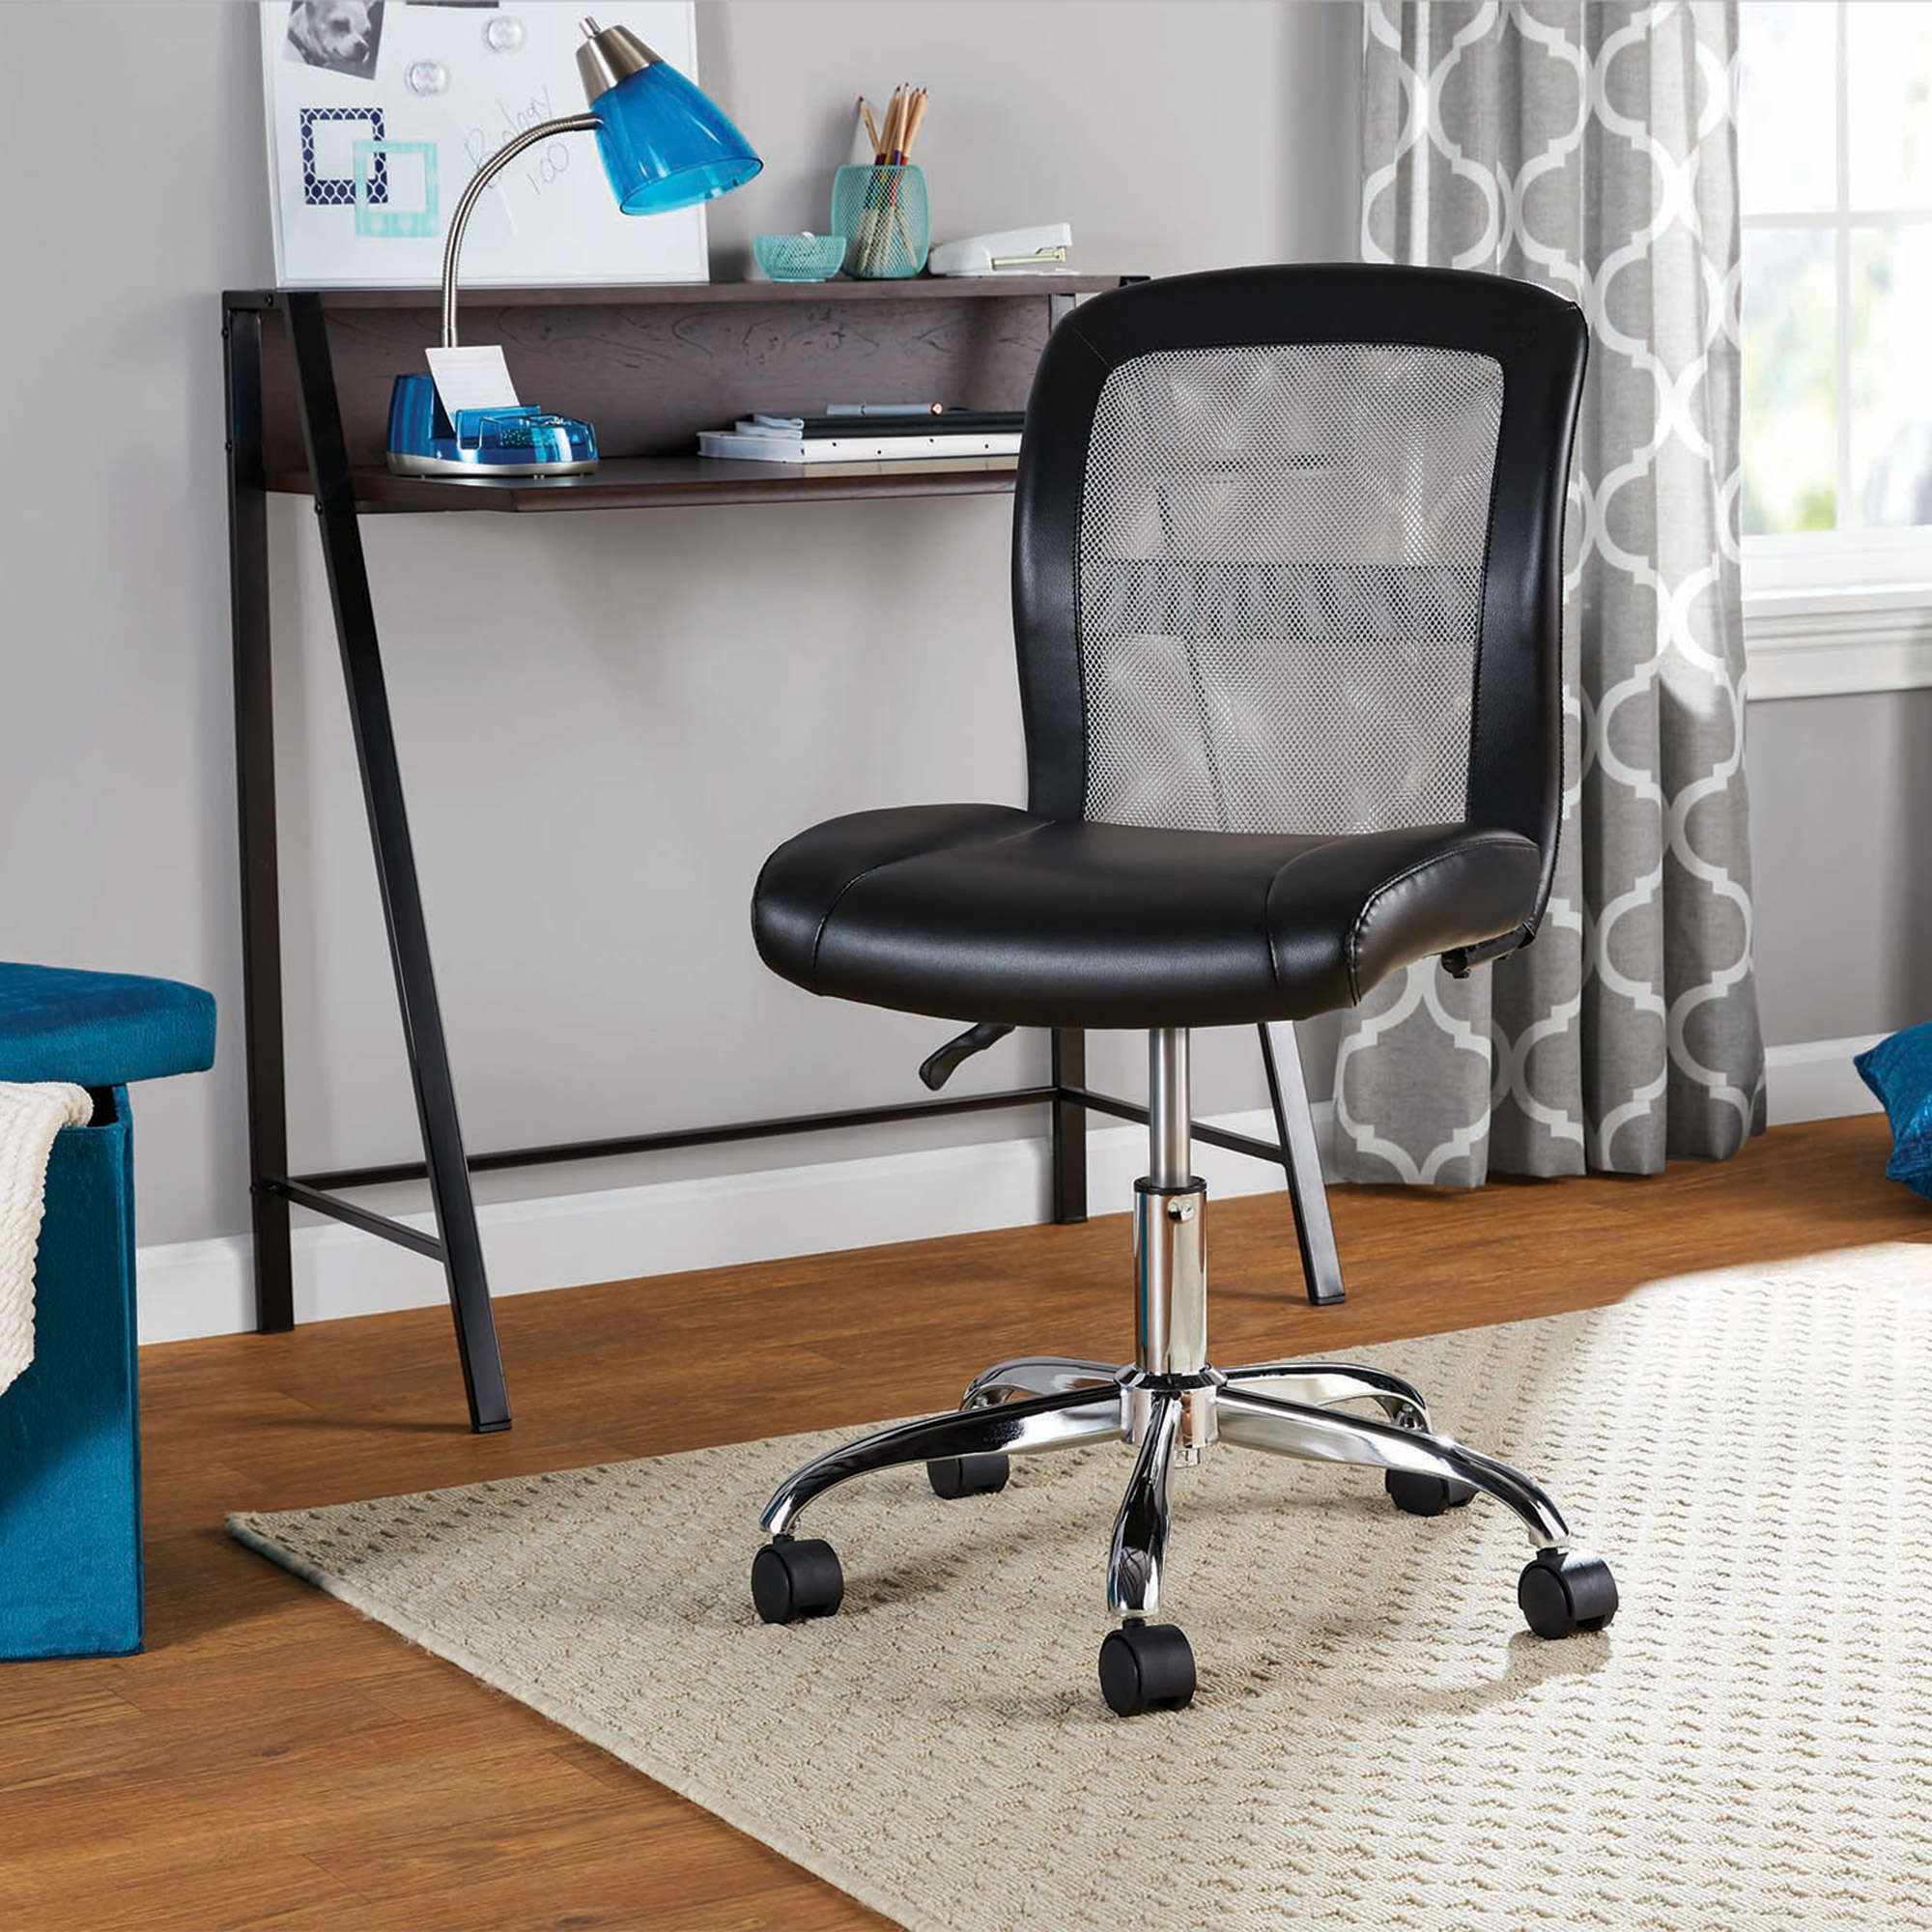 Mainstays Mid-Back, Vinyl Mesh Task Office Chair, Black and Gray - image 3 of 5